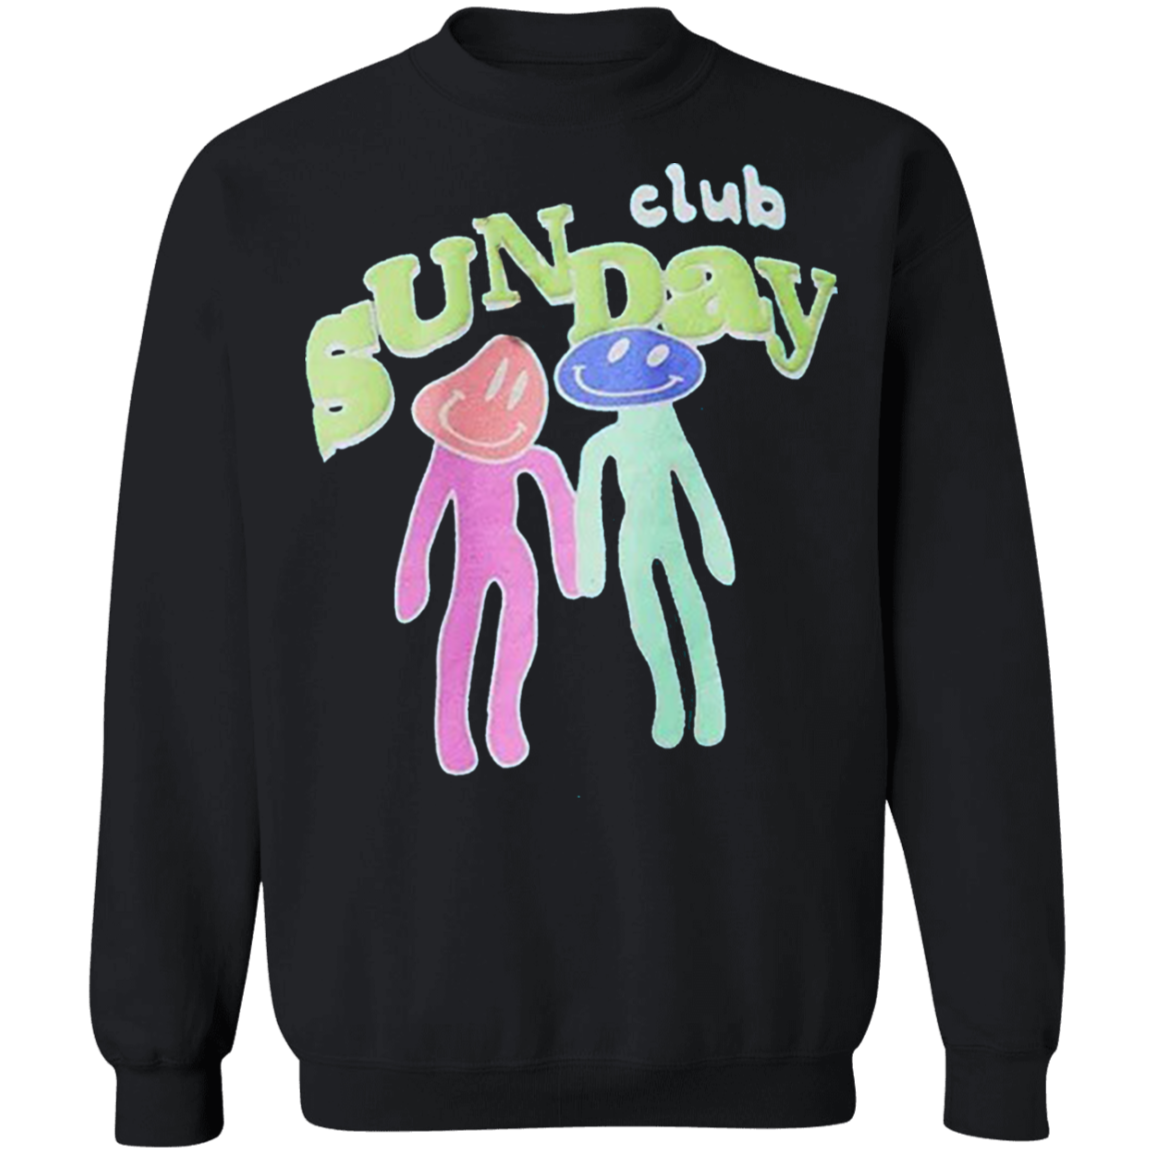 Sunday Club Sweatshirt Mycutegraphics Funny Shirt Unique Gifts For Friends